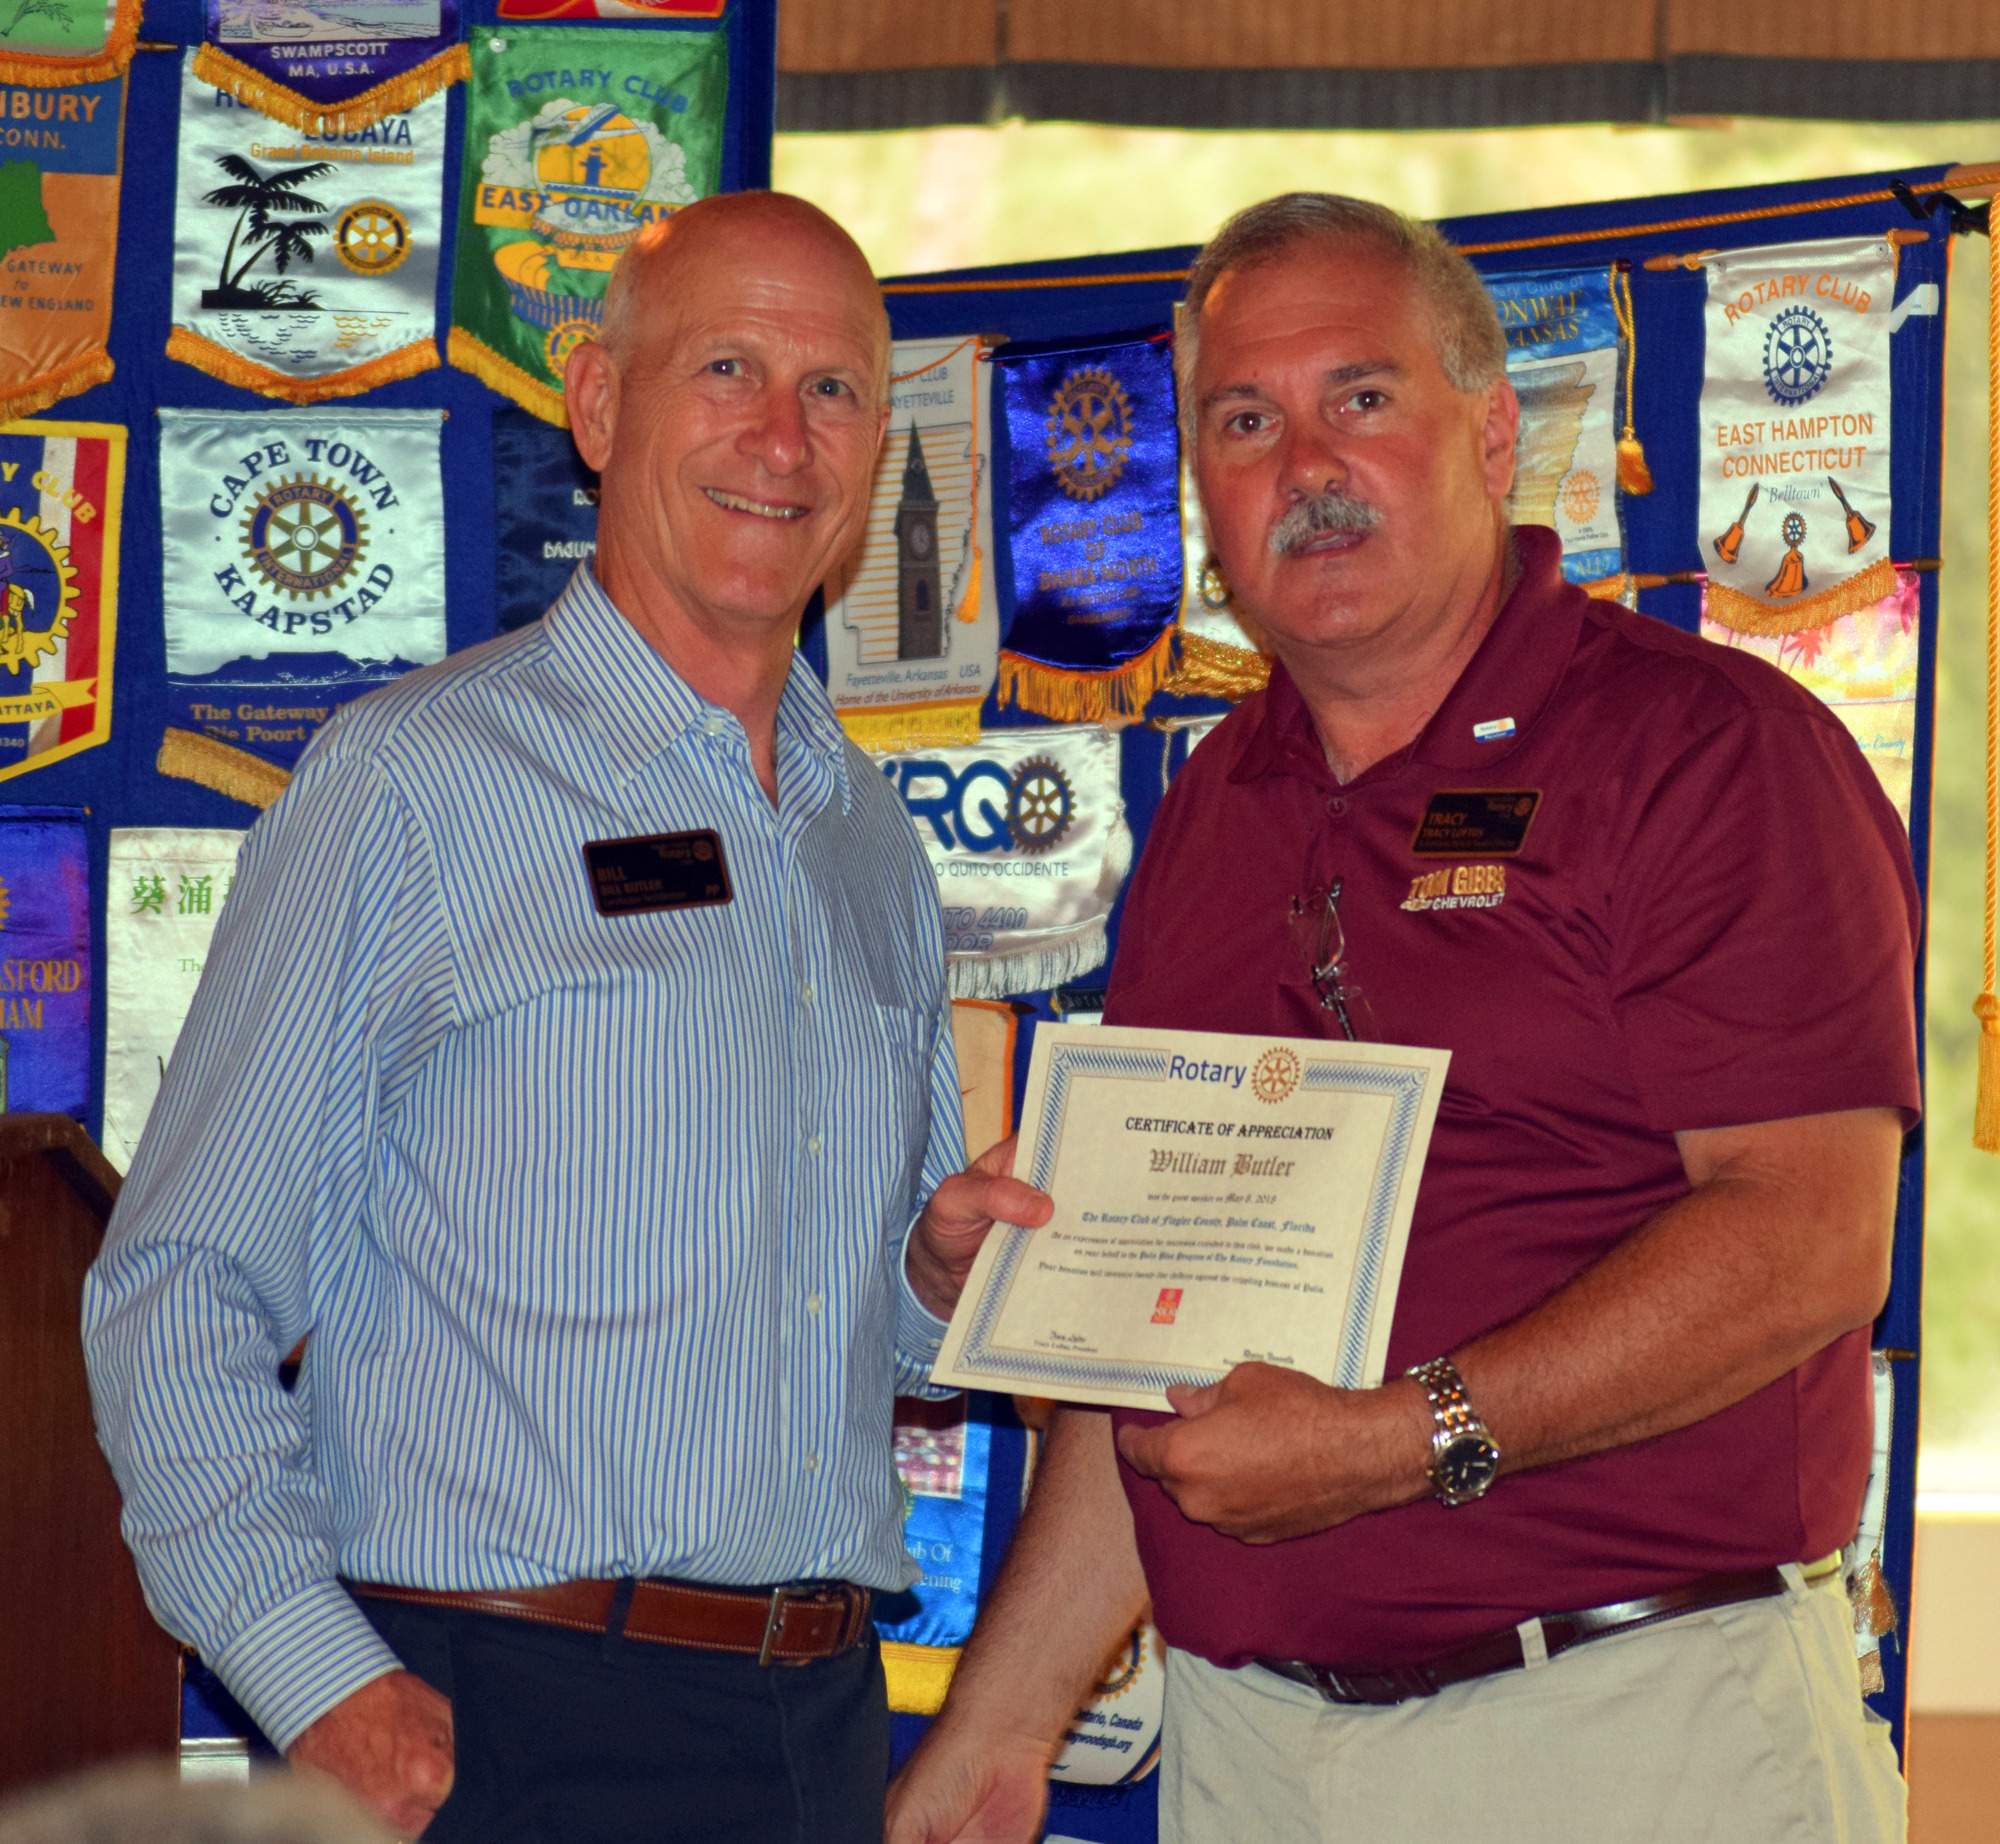 Bill Butler received the Flagler County Rotarian of the Year award, presented by then President Tracy Loftus. Photo courtesy of Marketing 2 Go